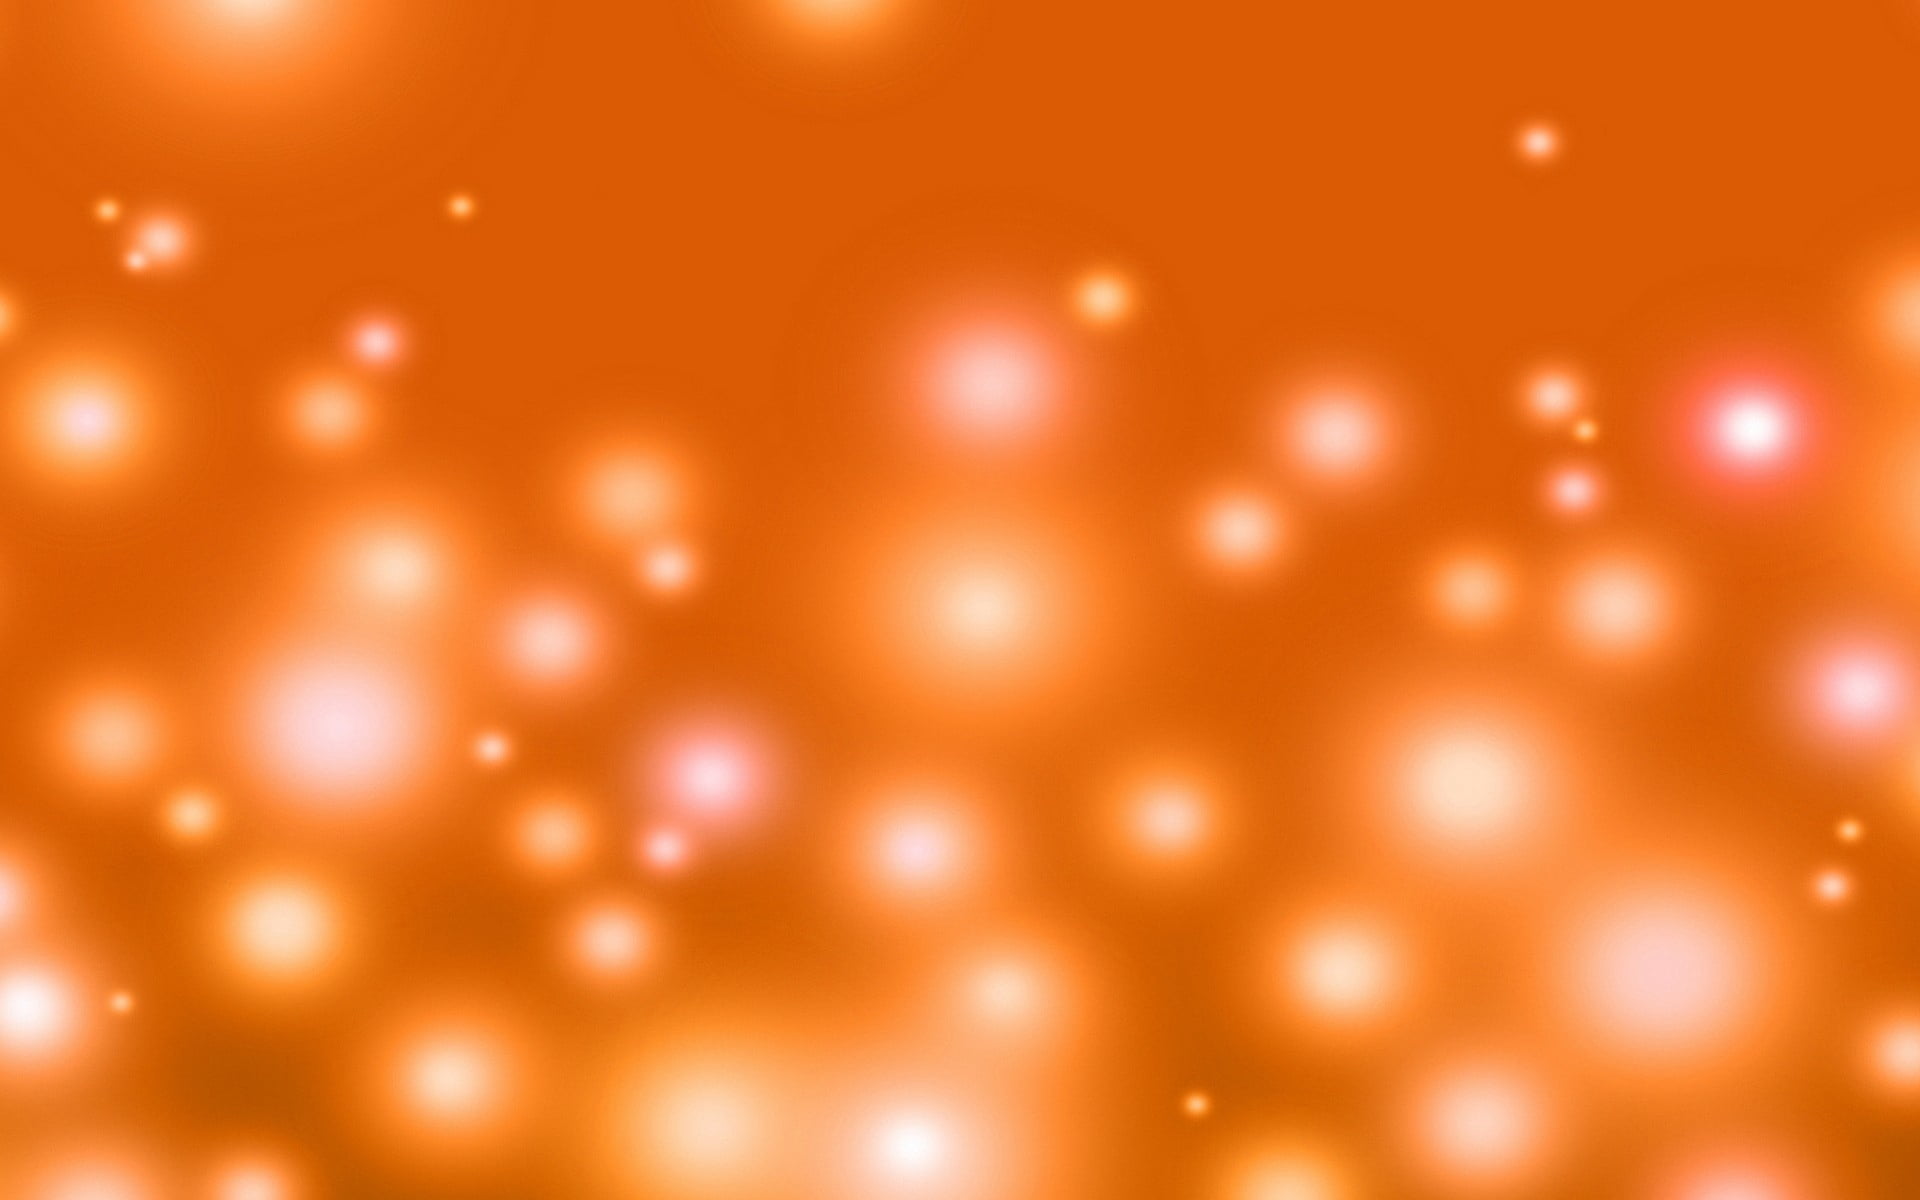 orange lights wallpaper, point, shine, backgrounds, shiny, abstract